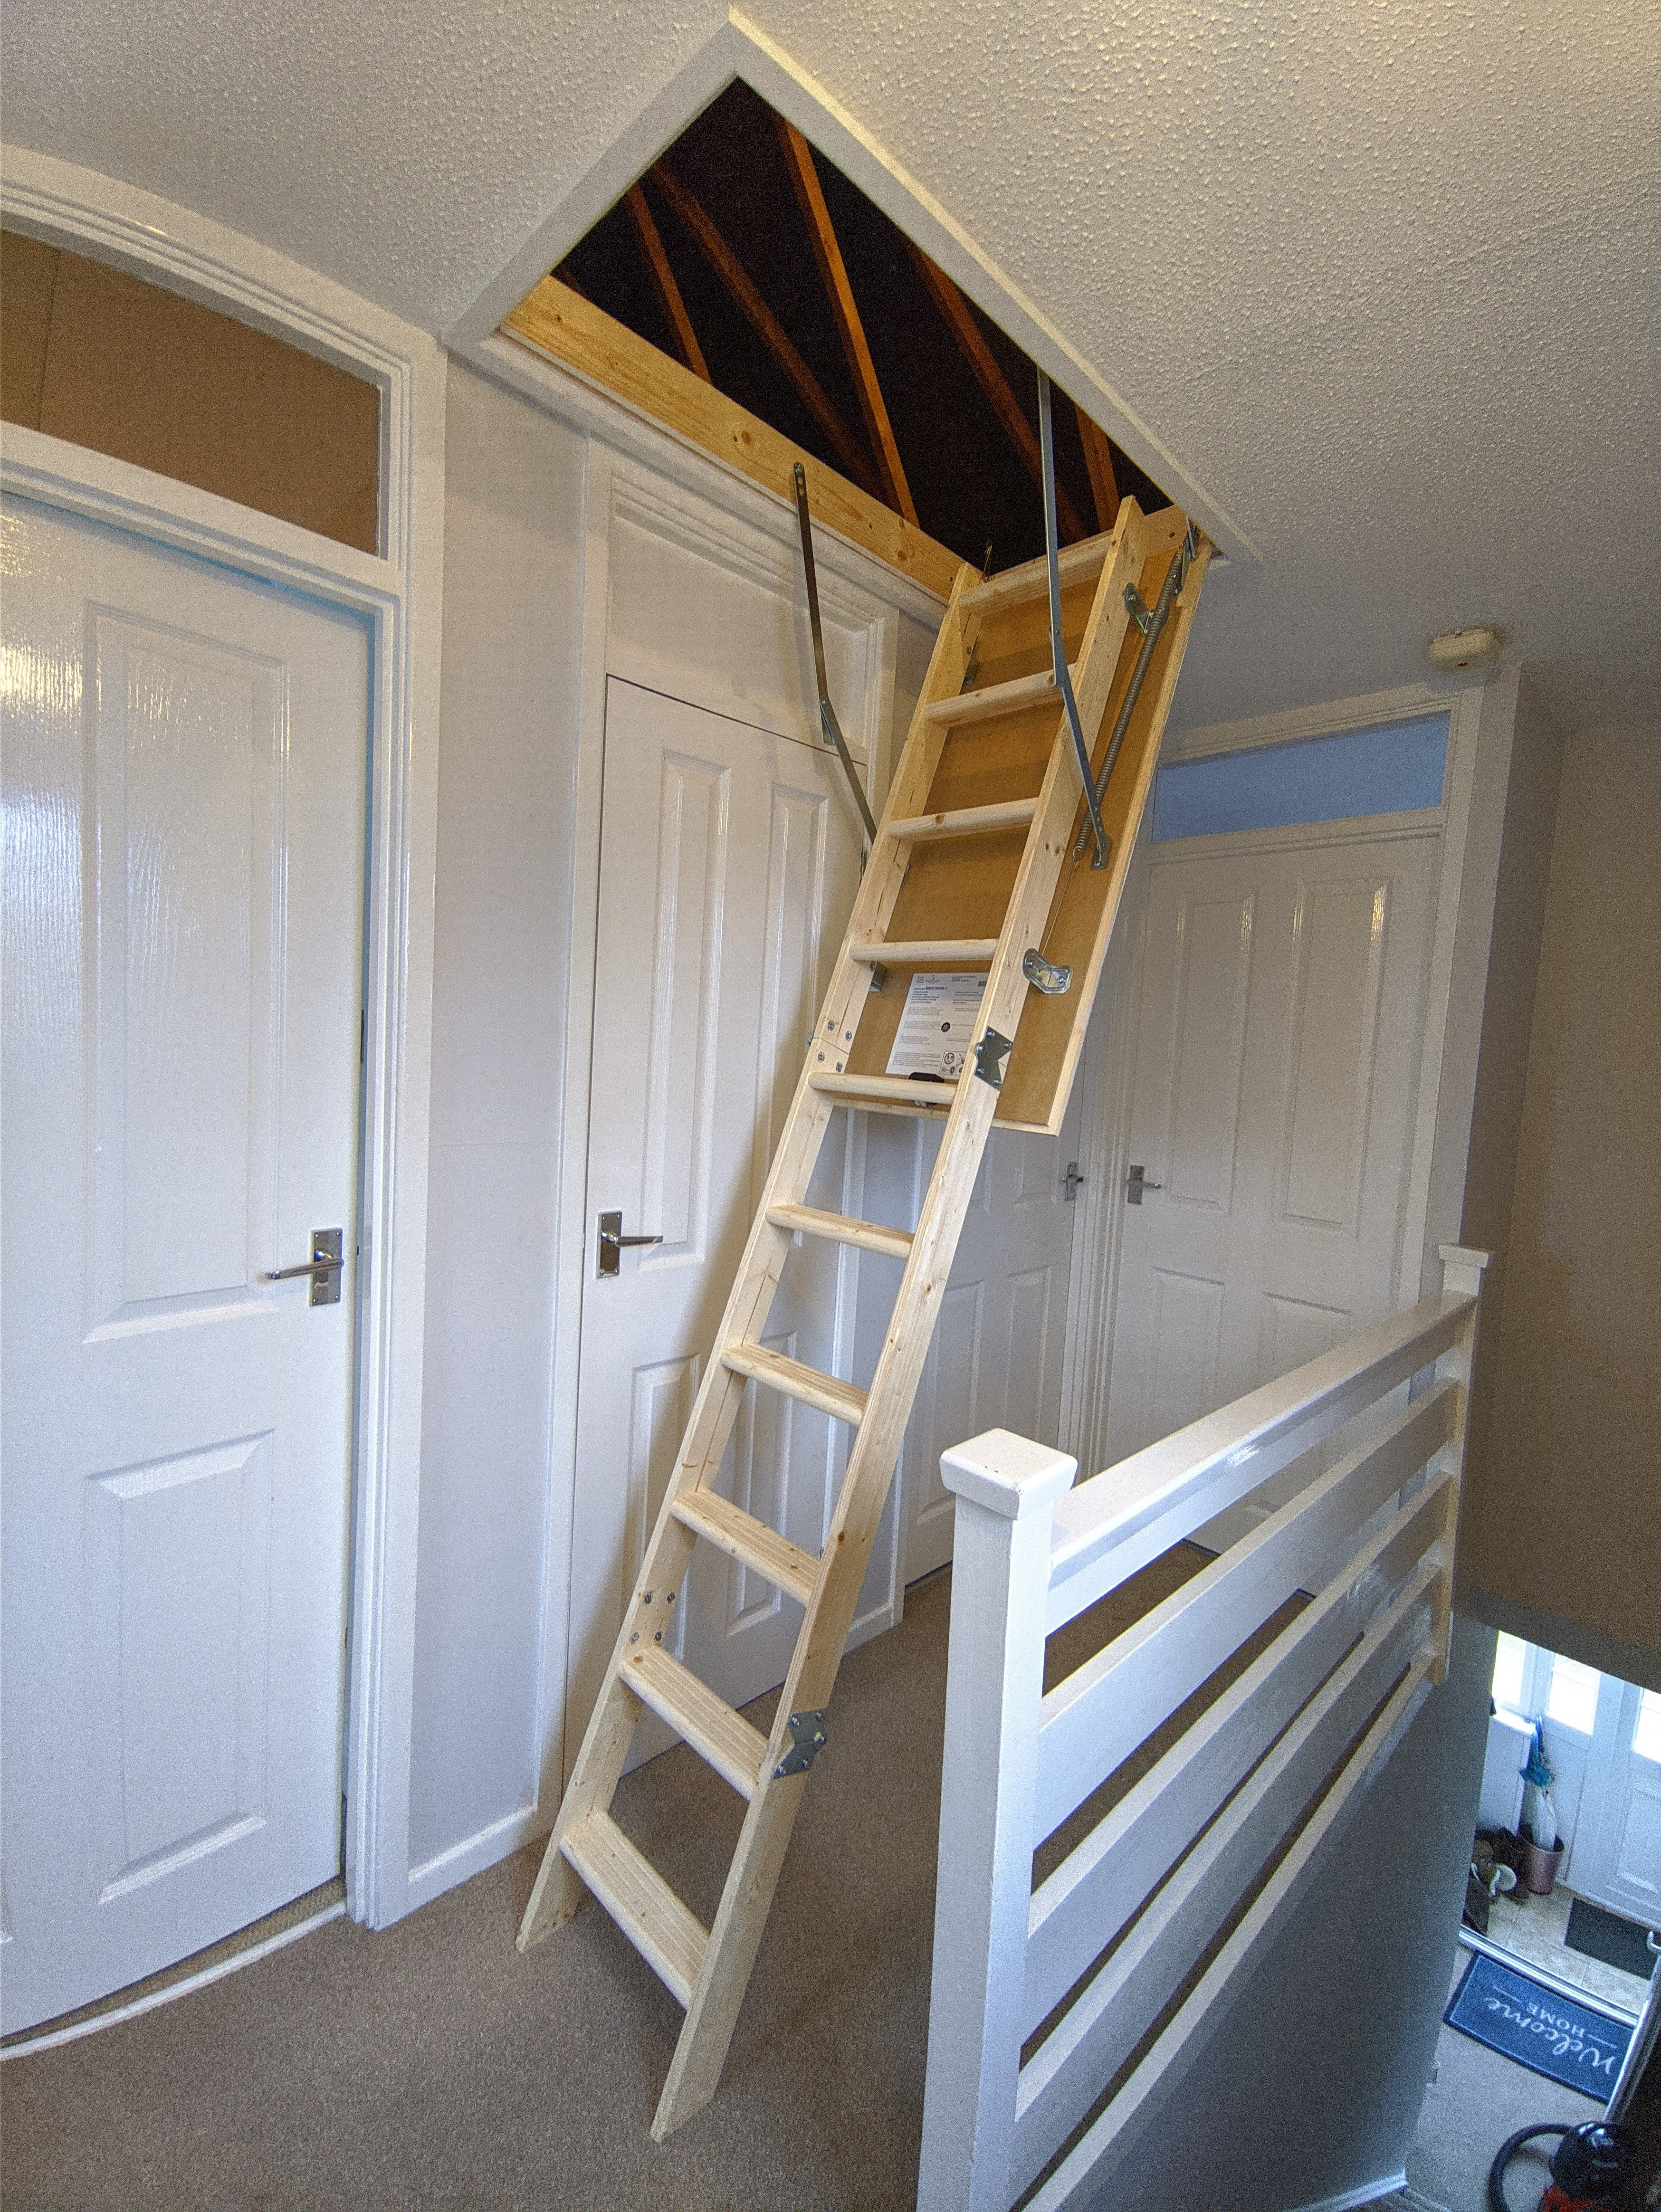 Loft ladder fitted